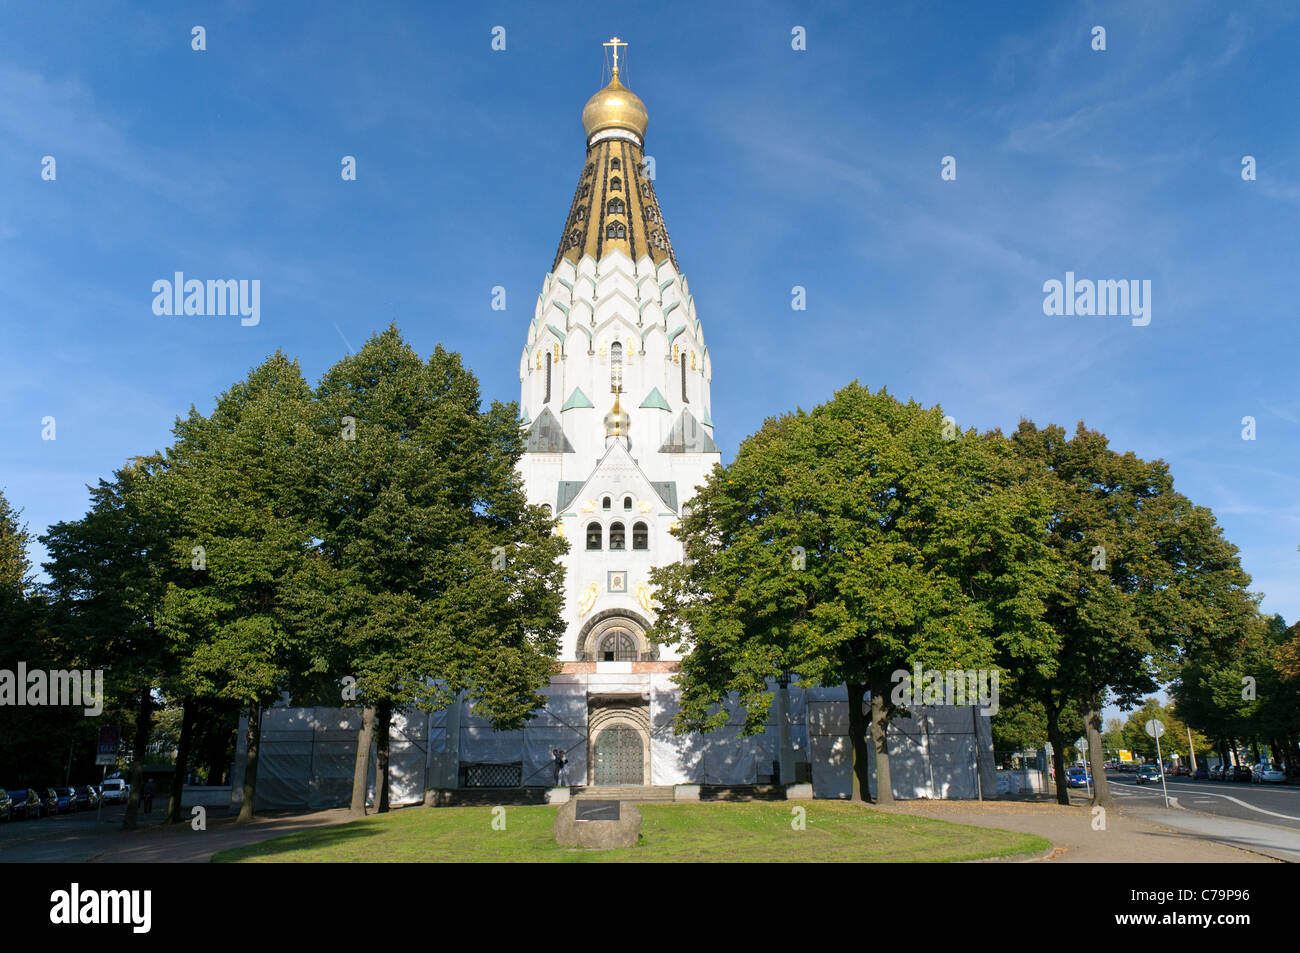 St.-Alexi memorial church, built to commemorate the fallen of the Battle of Leipzig 1813, Leipzig, Germany, Europe Stock Photo